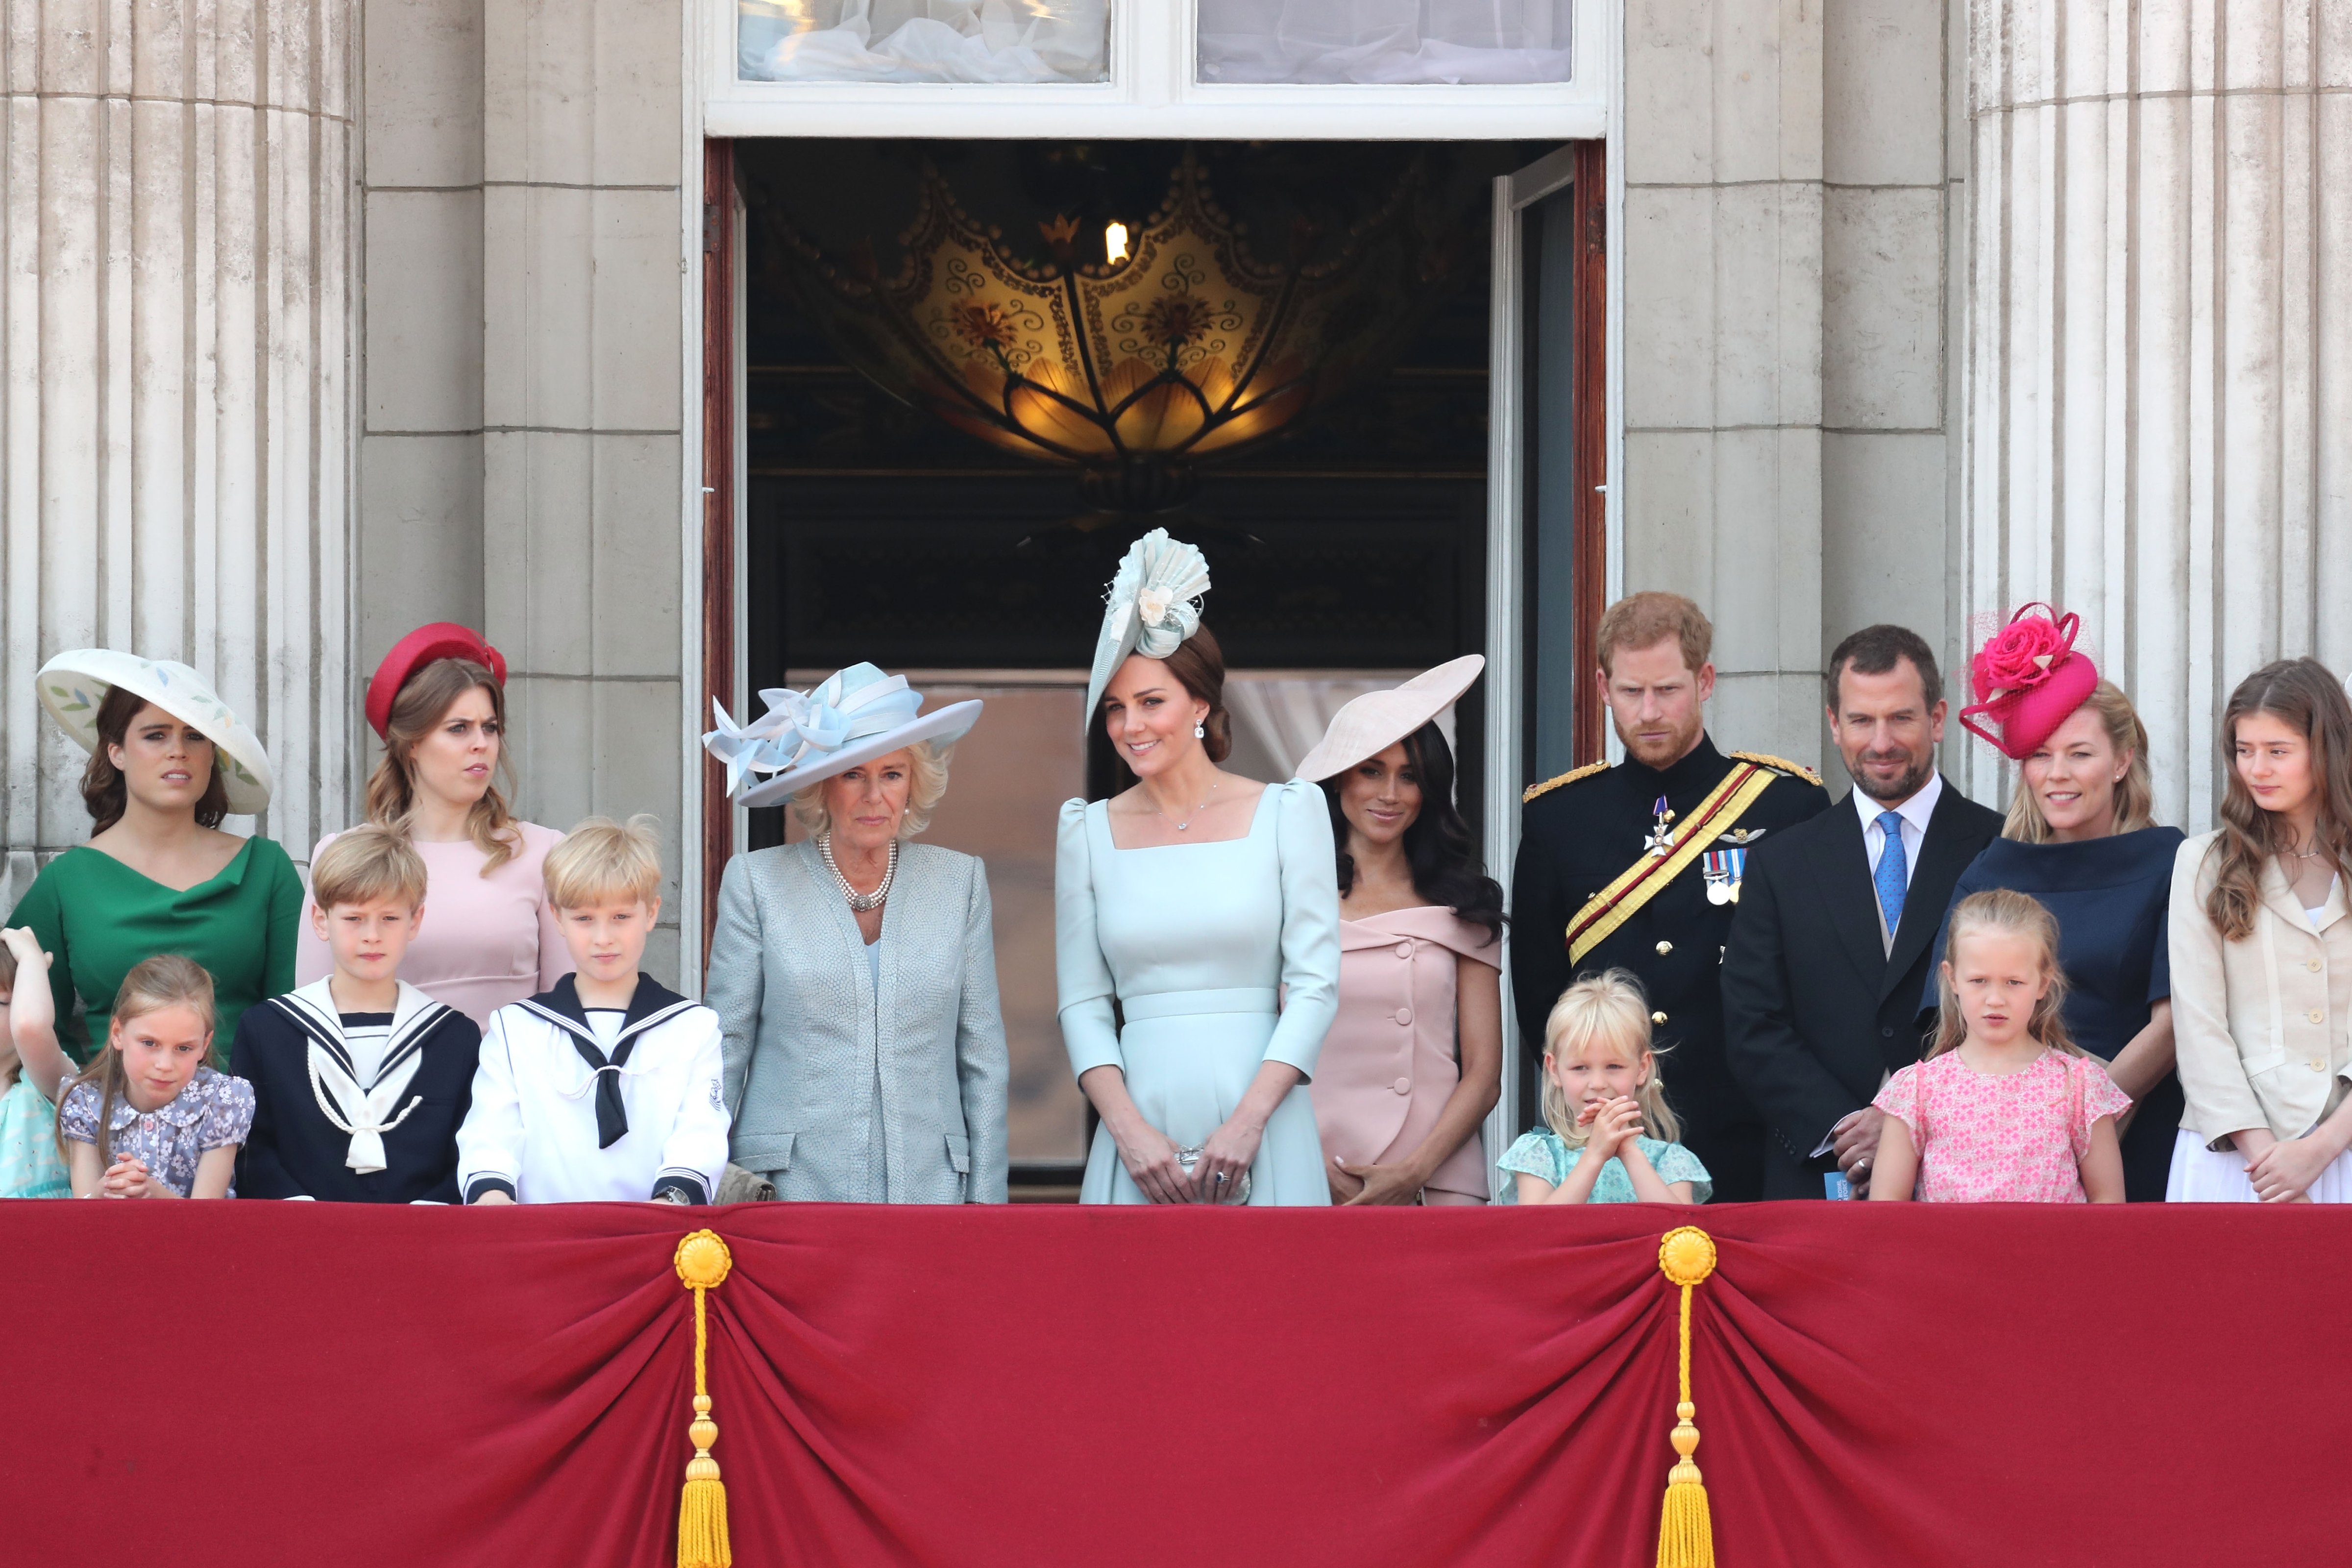 (From left to right) Princess Eugenie, Princess Beatrice, Camilla, Duchess Of Cornwall, Kate Middleton, Duchess of Cambridge, Meghan Markle, Duchess of Sussex, Prince Harry, Duke of Sussex, Peter Phillips, Autumn Phillips, Isla Phillips and Savannah Phillips on the balcony of Buckingham Palace during Trooping The Colour on June 9, 2018 in London, England (Chris Jackson—Getty Images)